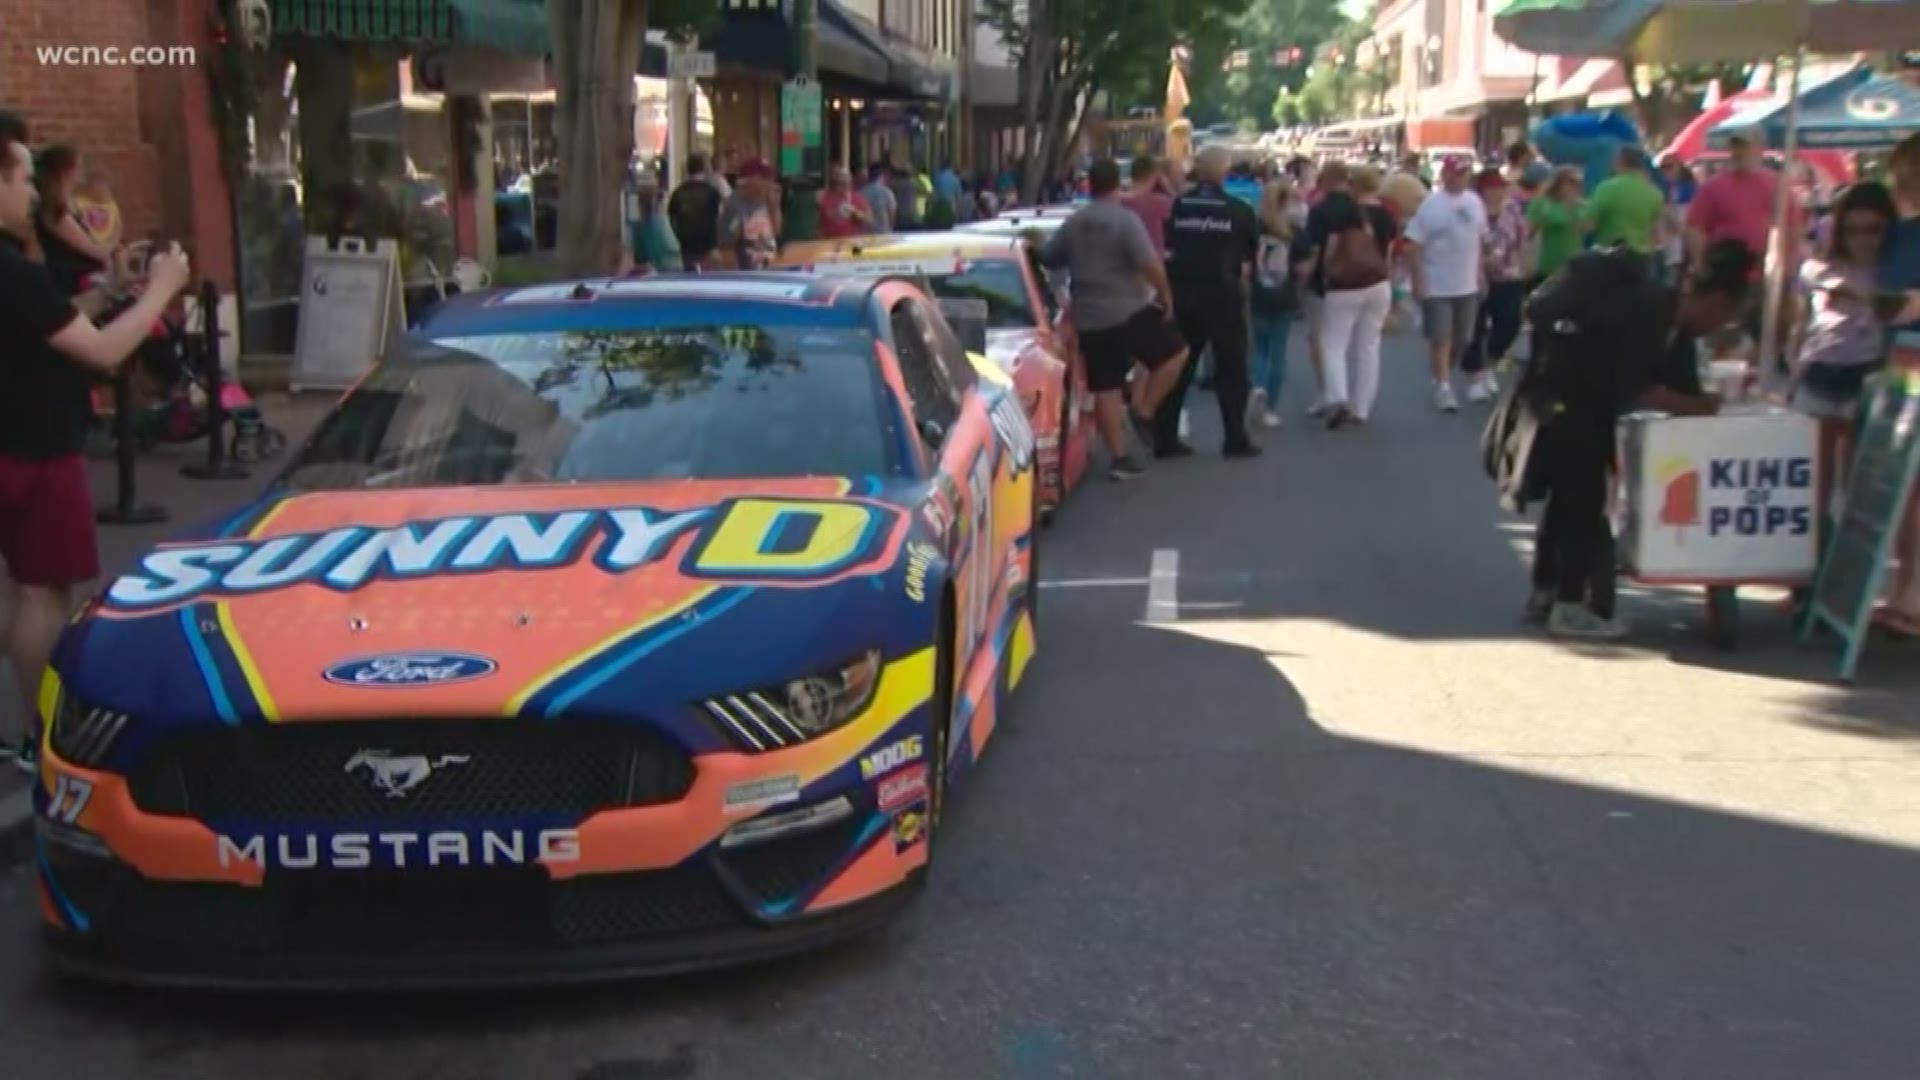 NASCAR fans lined the streets in downtown Concord to catch a glimpse of dozens of NASCAR Cup's Car Hauler trucks ahead of this weekend's big race.